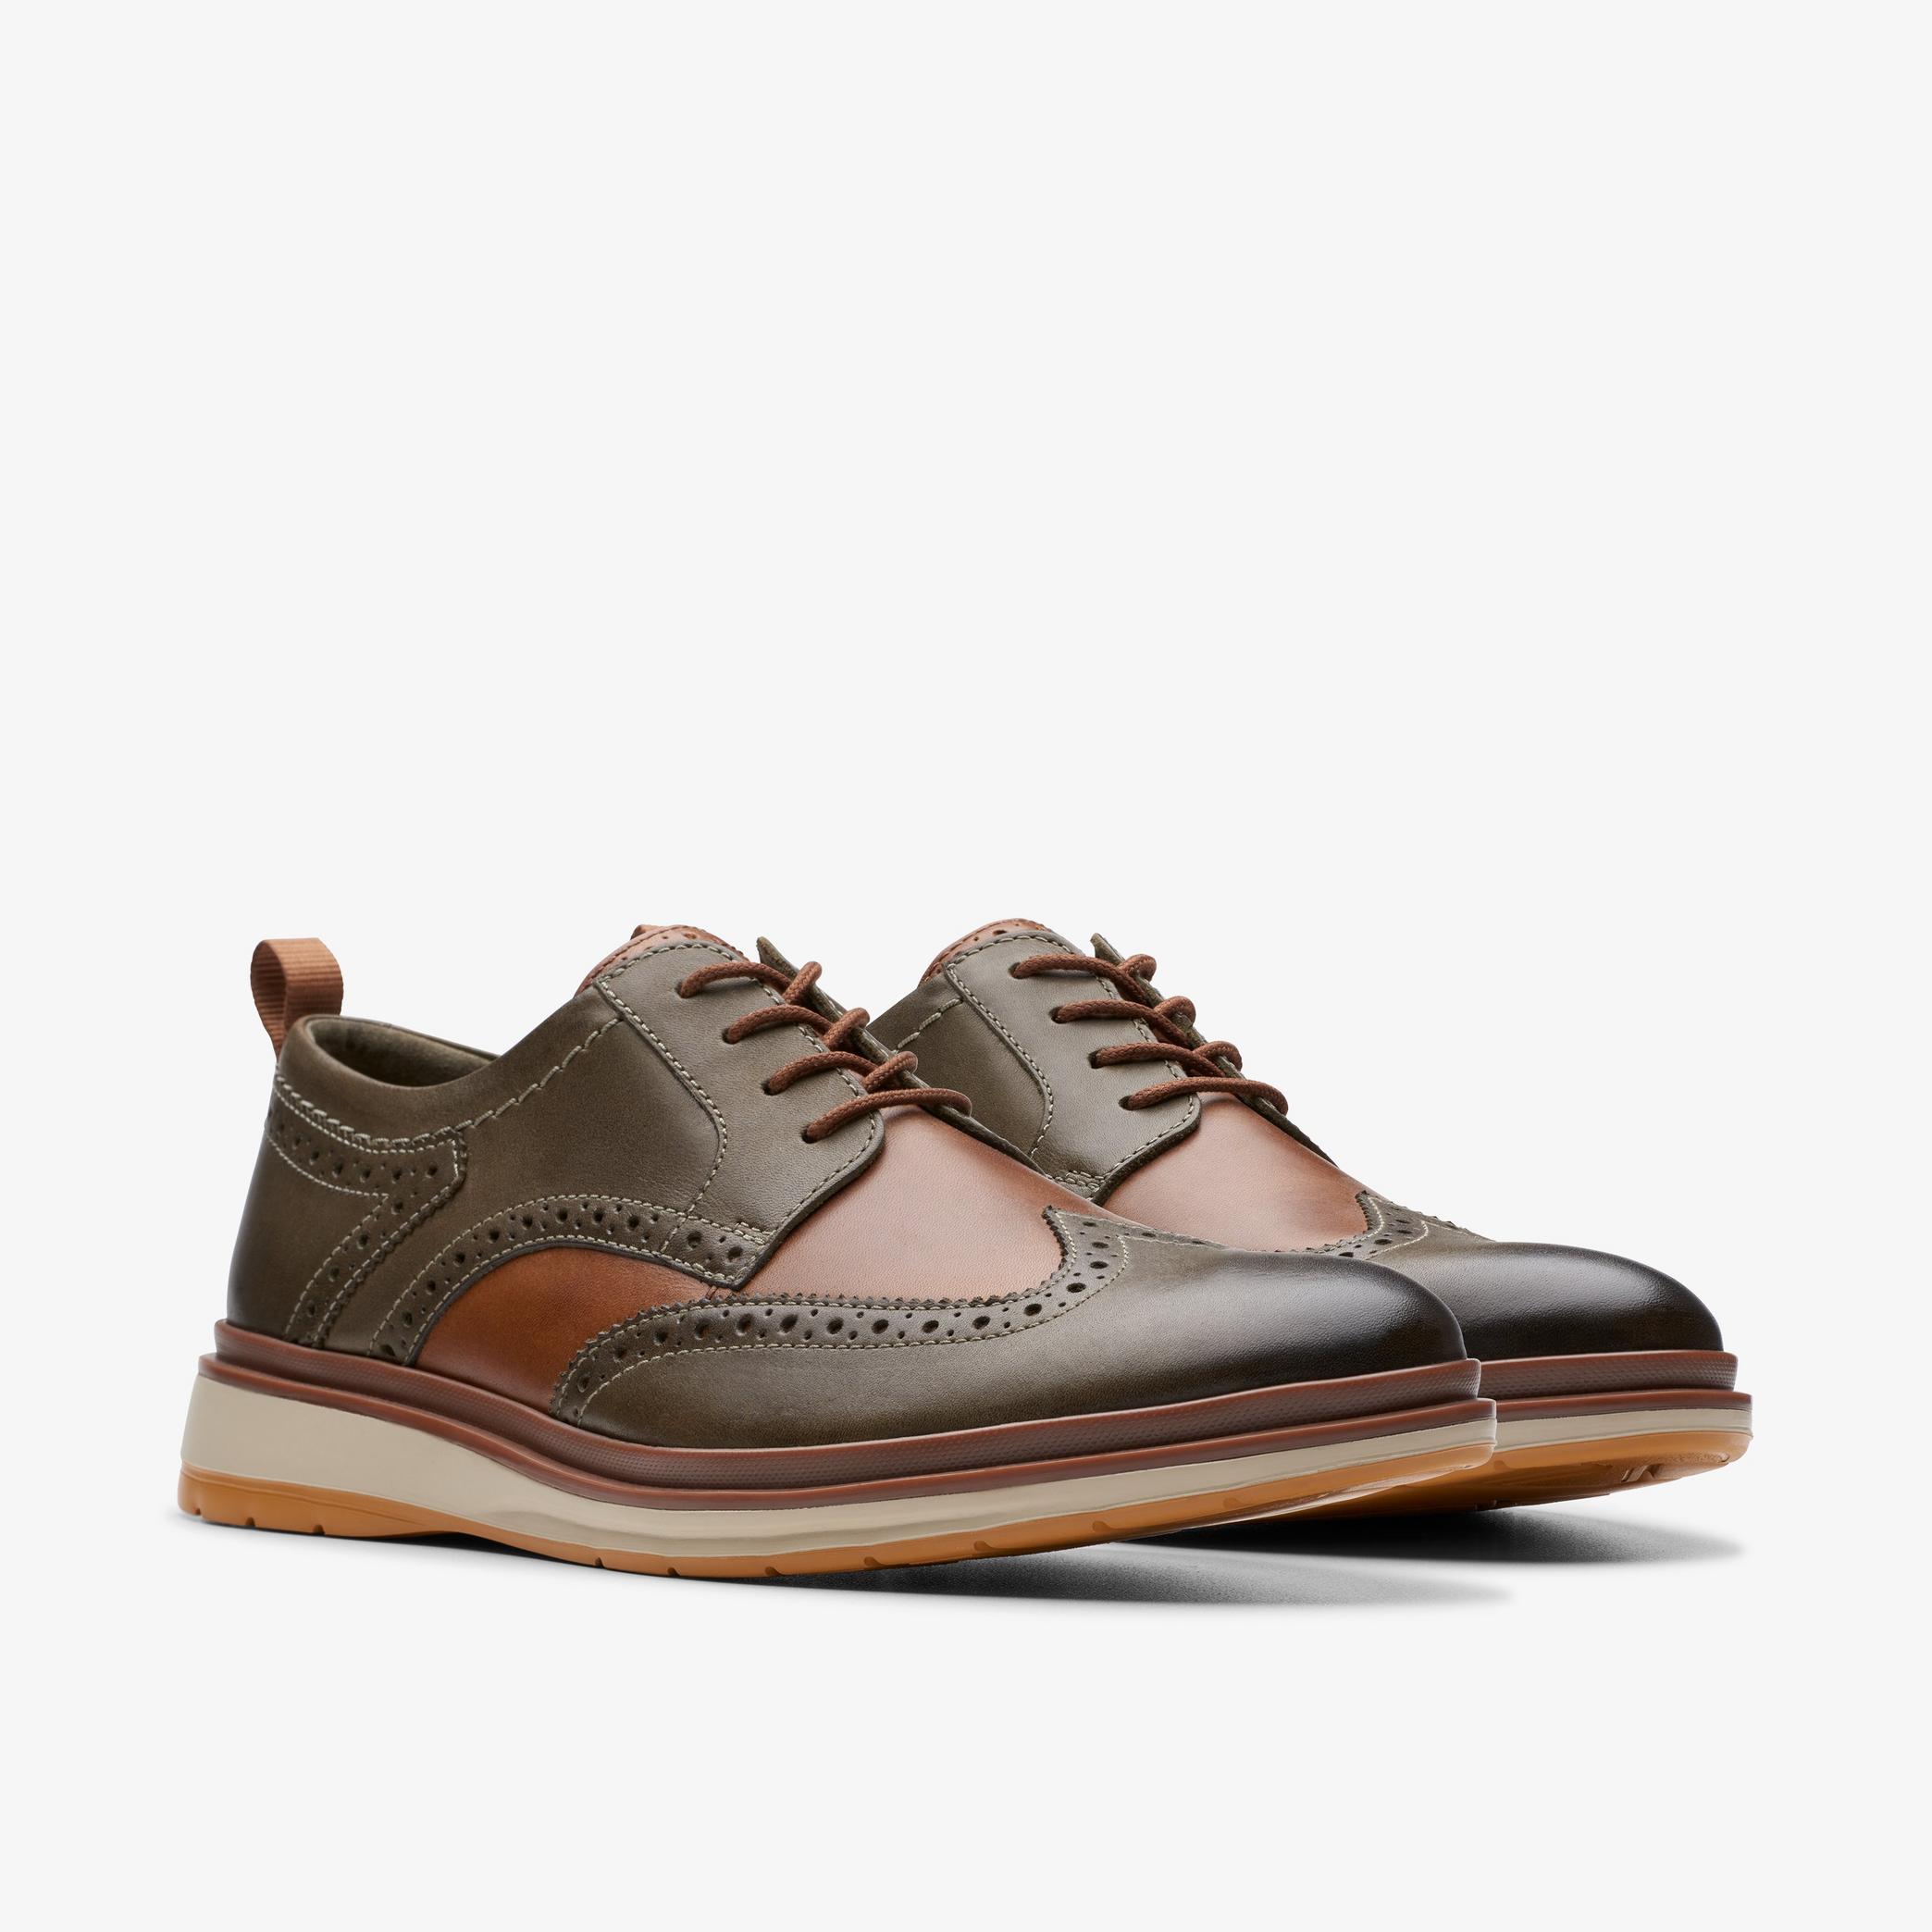 Chantry Wing Dark Olive Combination Oxford Shoes, view 4 of 7